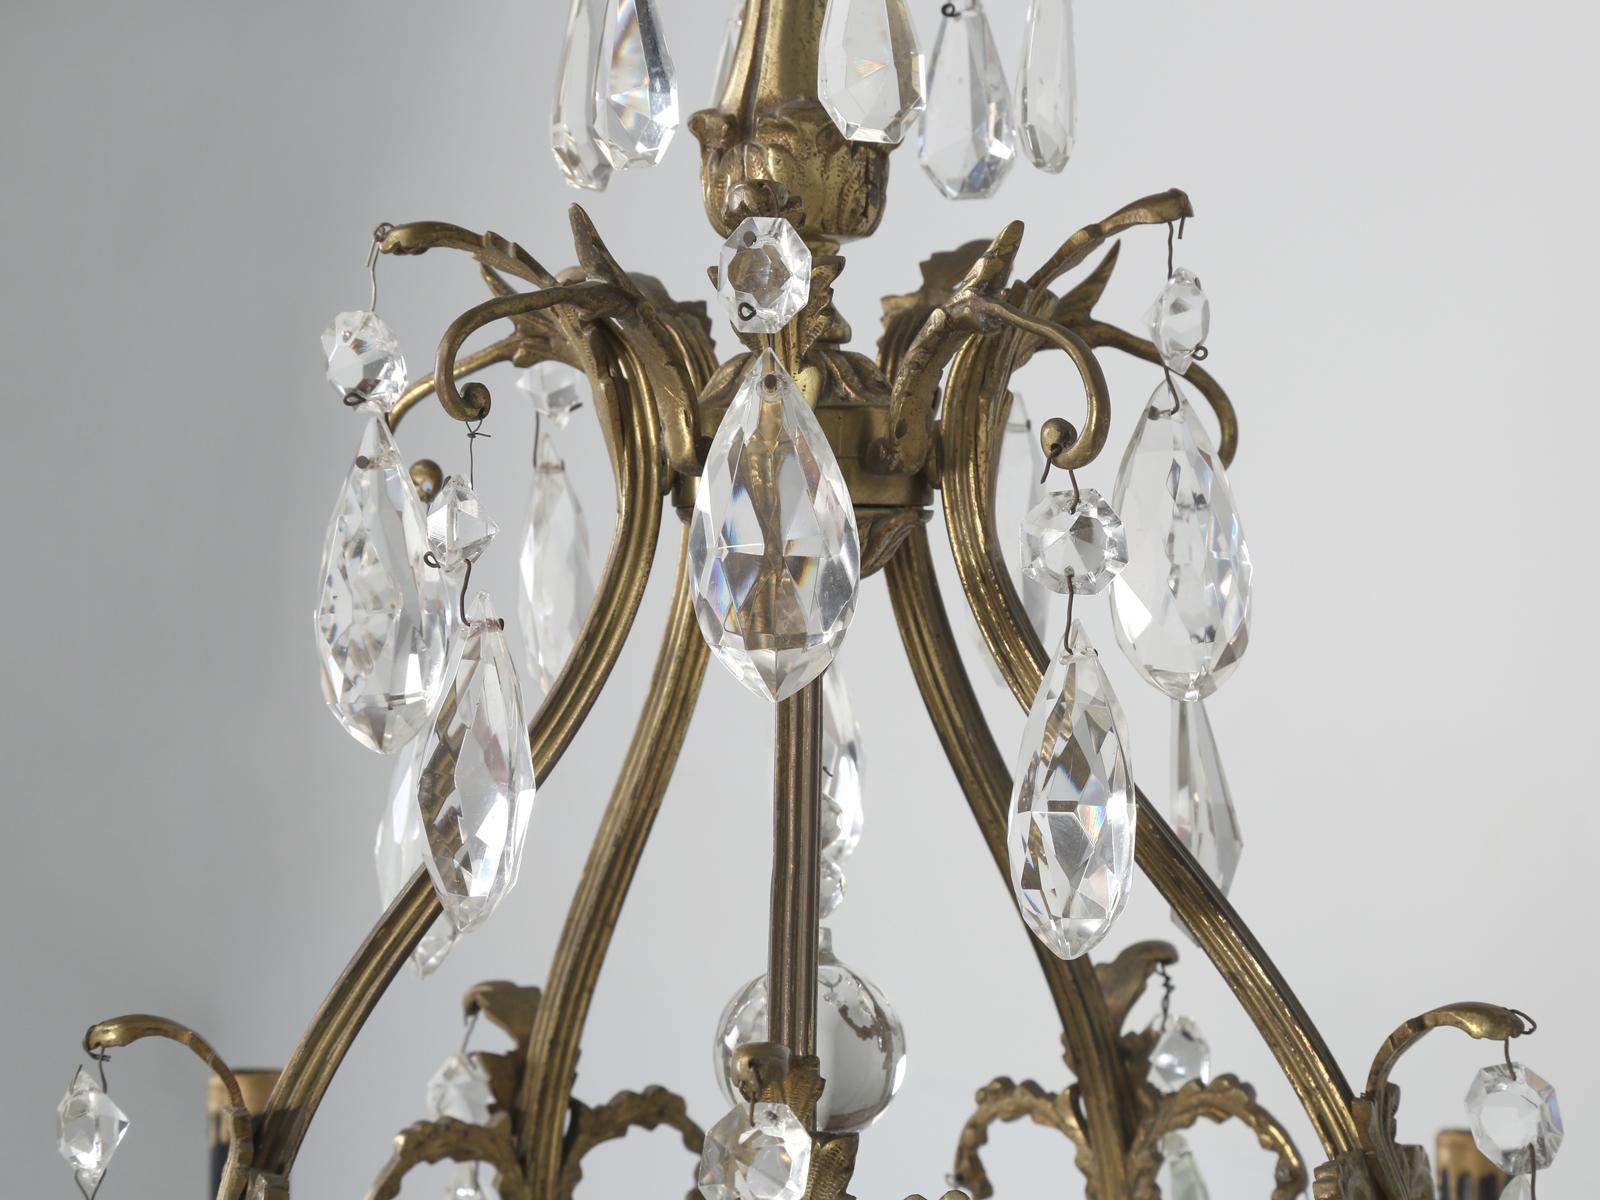 Hand-Crafted Vintage Crystal and Bronze Chandelier from Chicago North Shore Historic Home